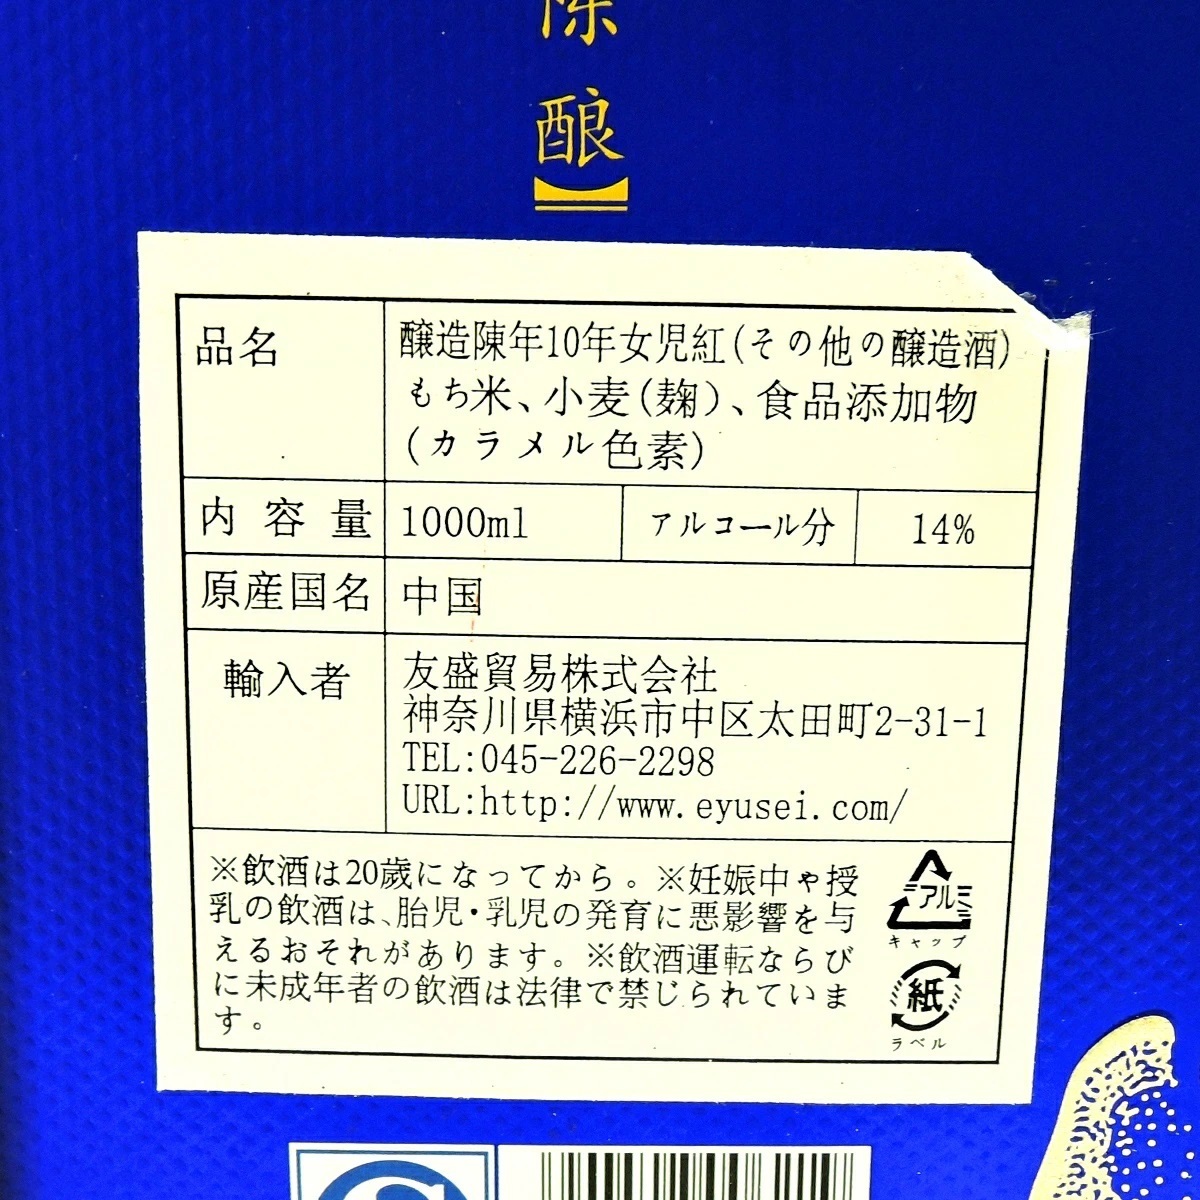  old sake shaoxingjiu . structure . year 10 year woman ..1000ml alcohol frequency 14% FS box equipped 